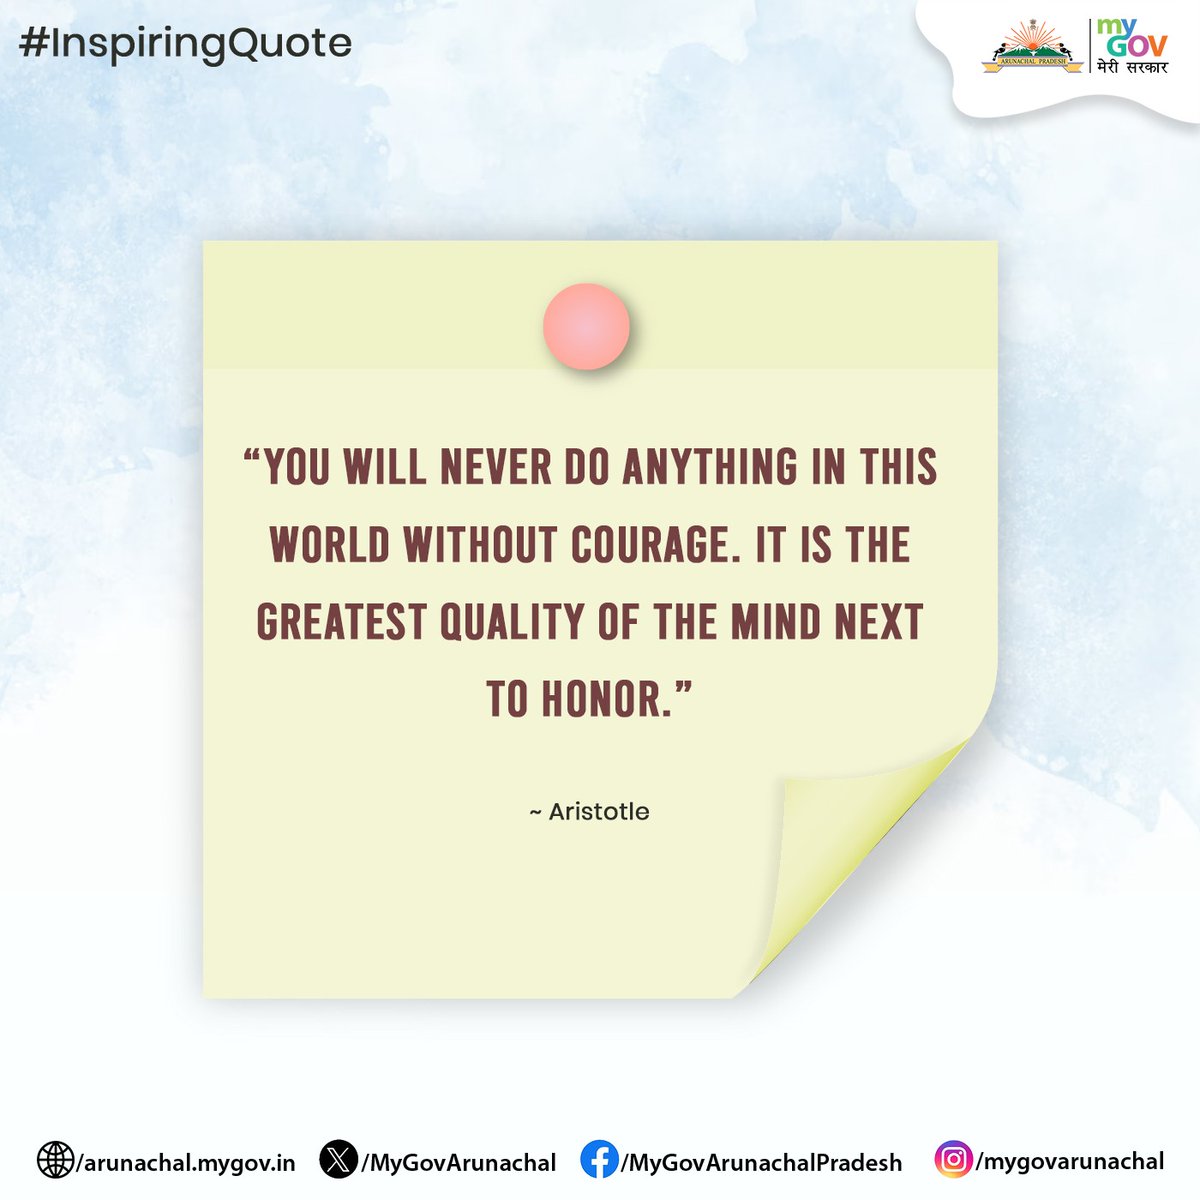 #InspiringQuote

Kickstart your day on a positive note with this inspiring quote.